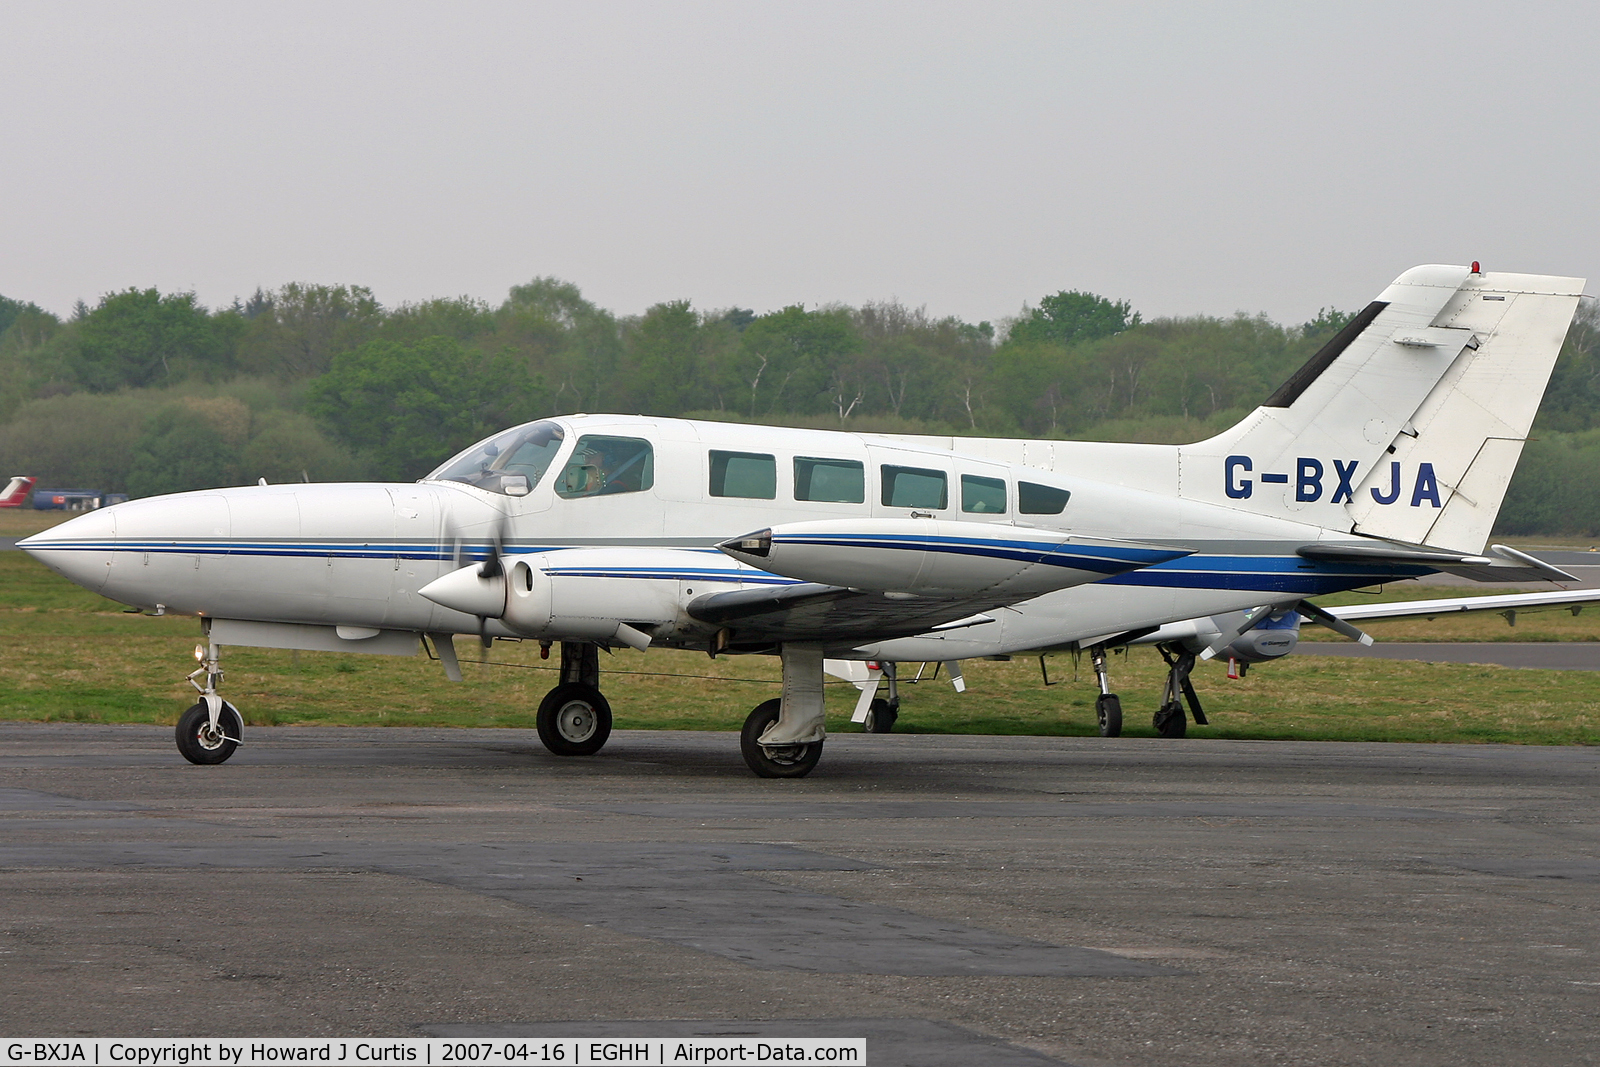 G-BXJA, 1973 Cessna 402B C/N 402B-0356, Privately owned.